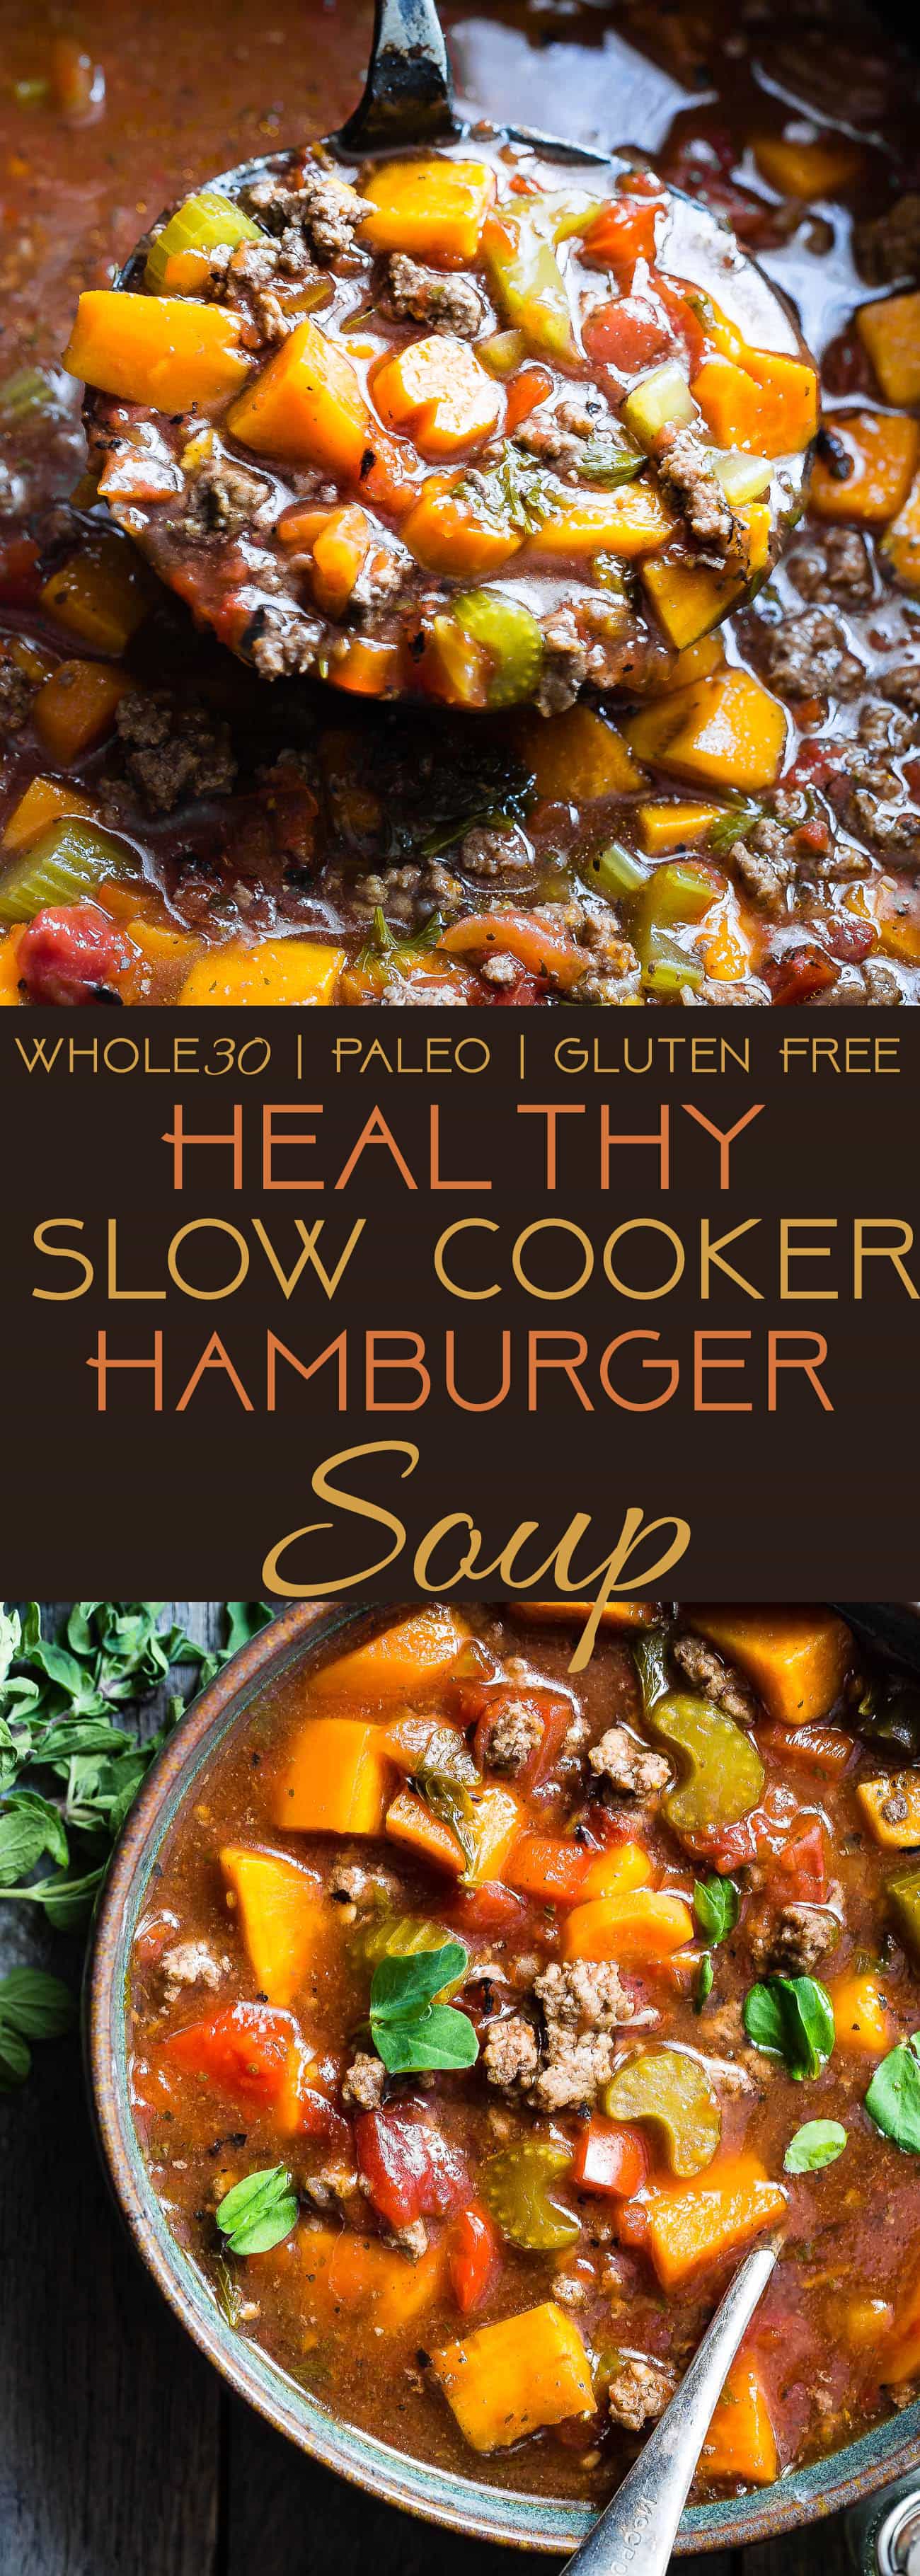 Paleo Slow Cooker Hamburger Soup -  This easy, healthy hamburger soup is made in the slow cooker and is a grain/dairy/sugar/gluten free and whole30 dinner that the whole family will love! Makes great leftovers too!  | Foodfaithfitness.com | @FoodFaithFit